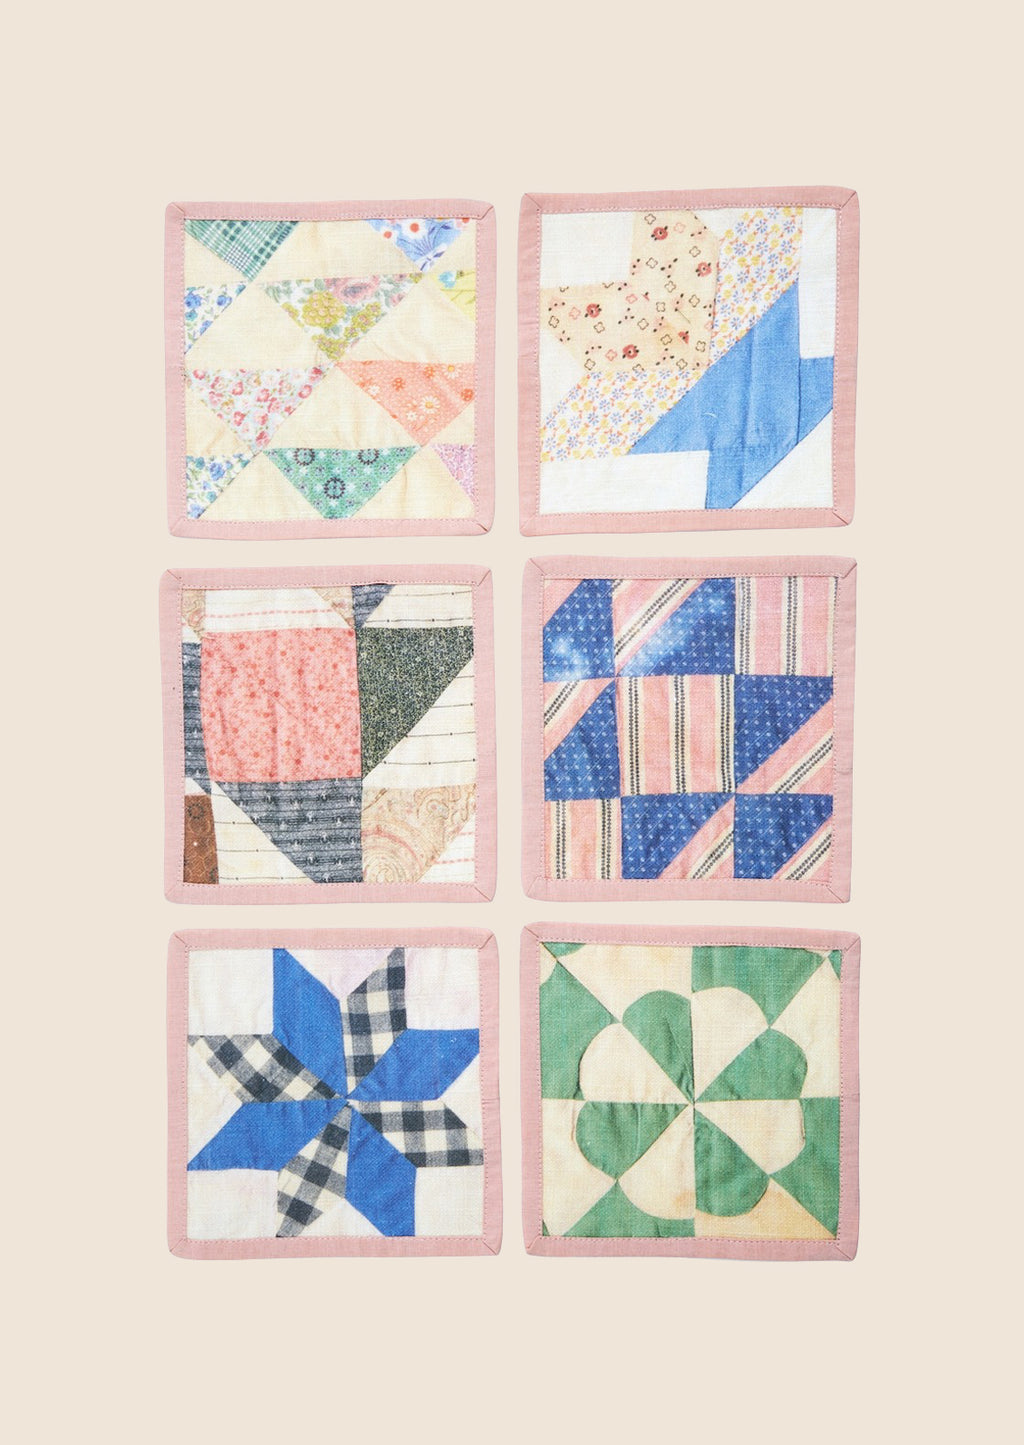 2: A set of quilt printed square cocktail napkins in 6 different patterns.